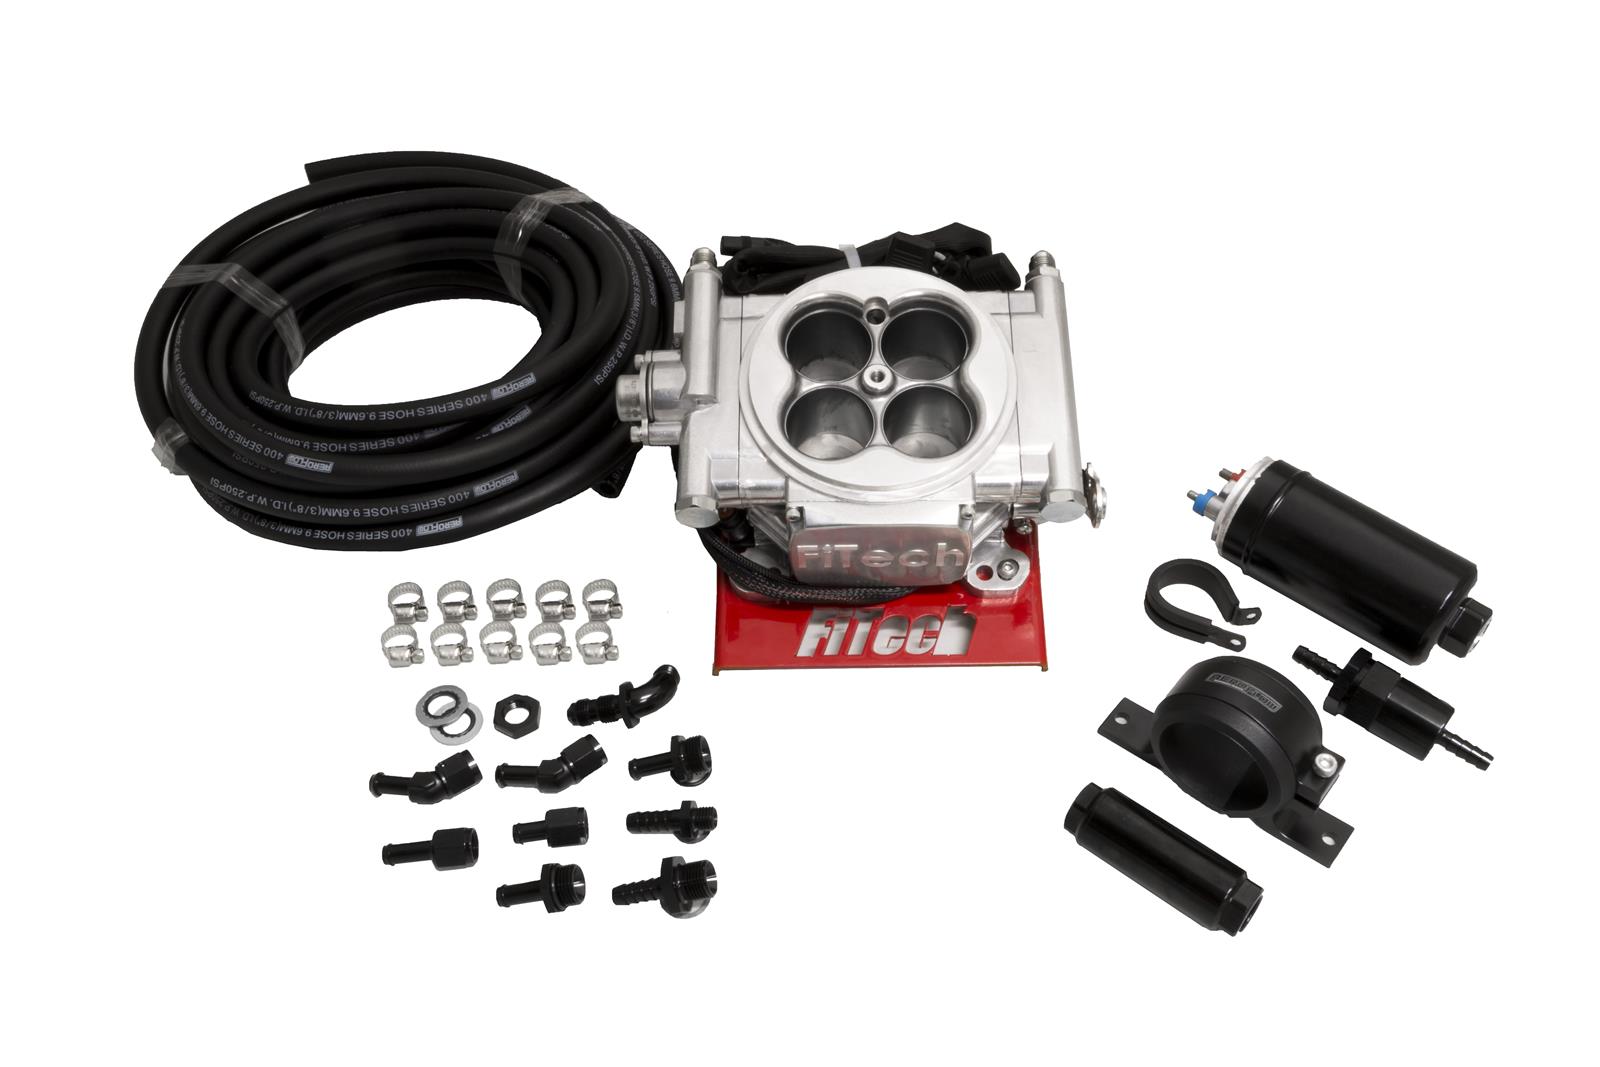 Fitech Fuel Injection Fitech Go Efi 4 600 Hp Self Tuning Fuel Injection Systems Summit Racing